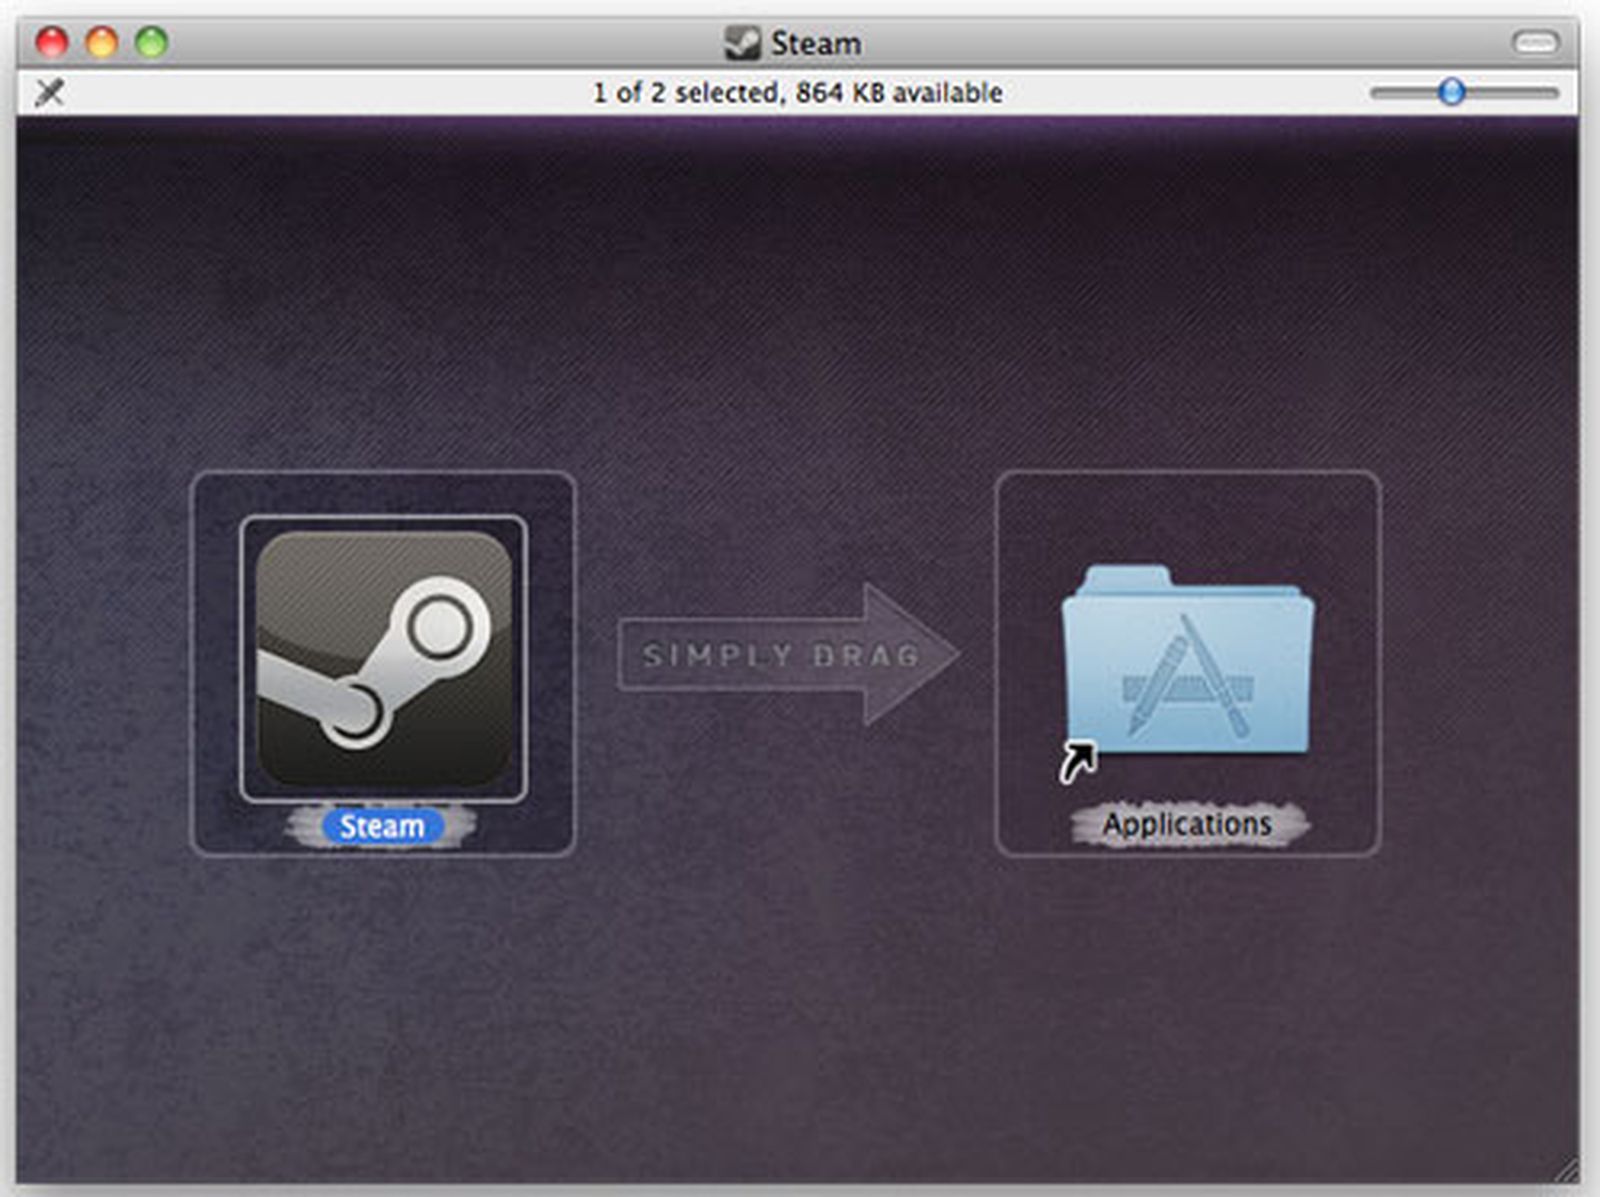 Steam for Mac Client Available for Download, Service Not Yet Active